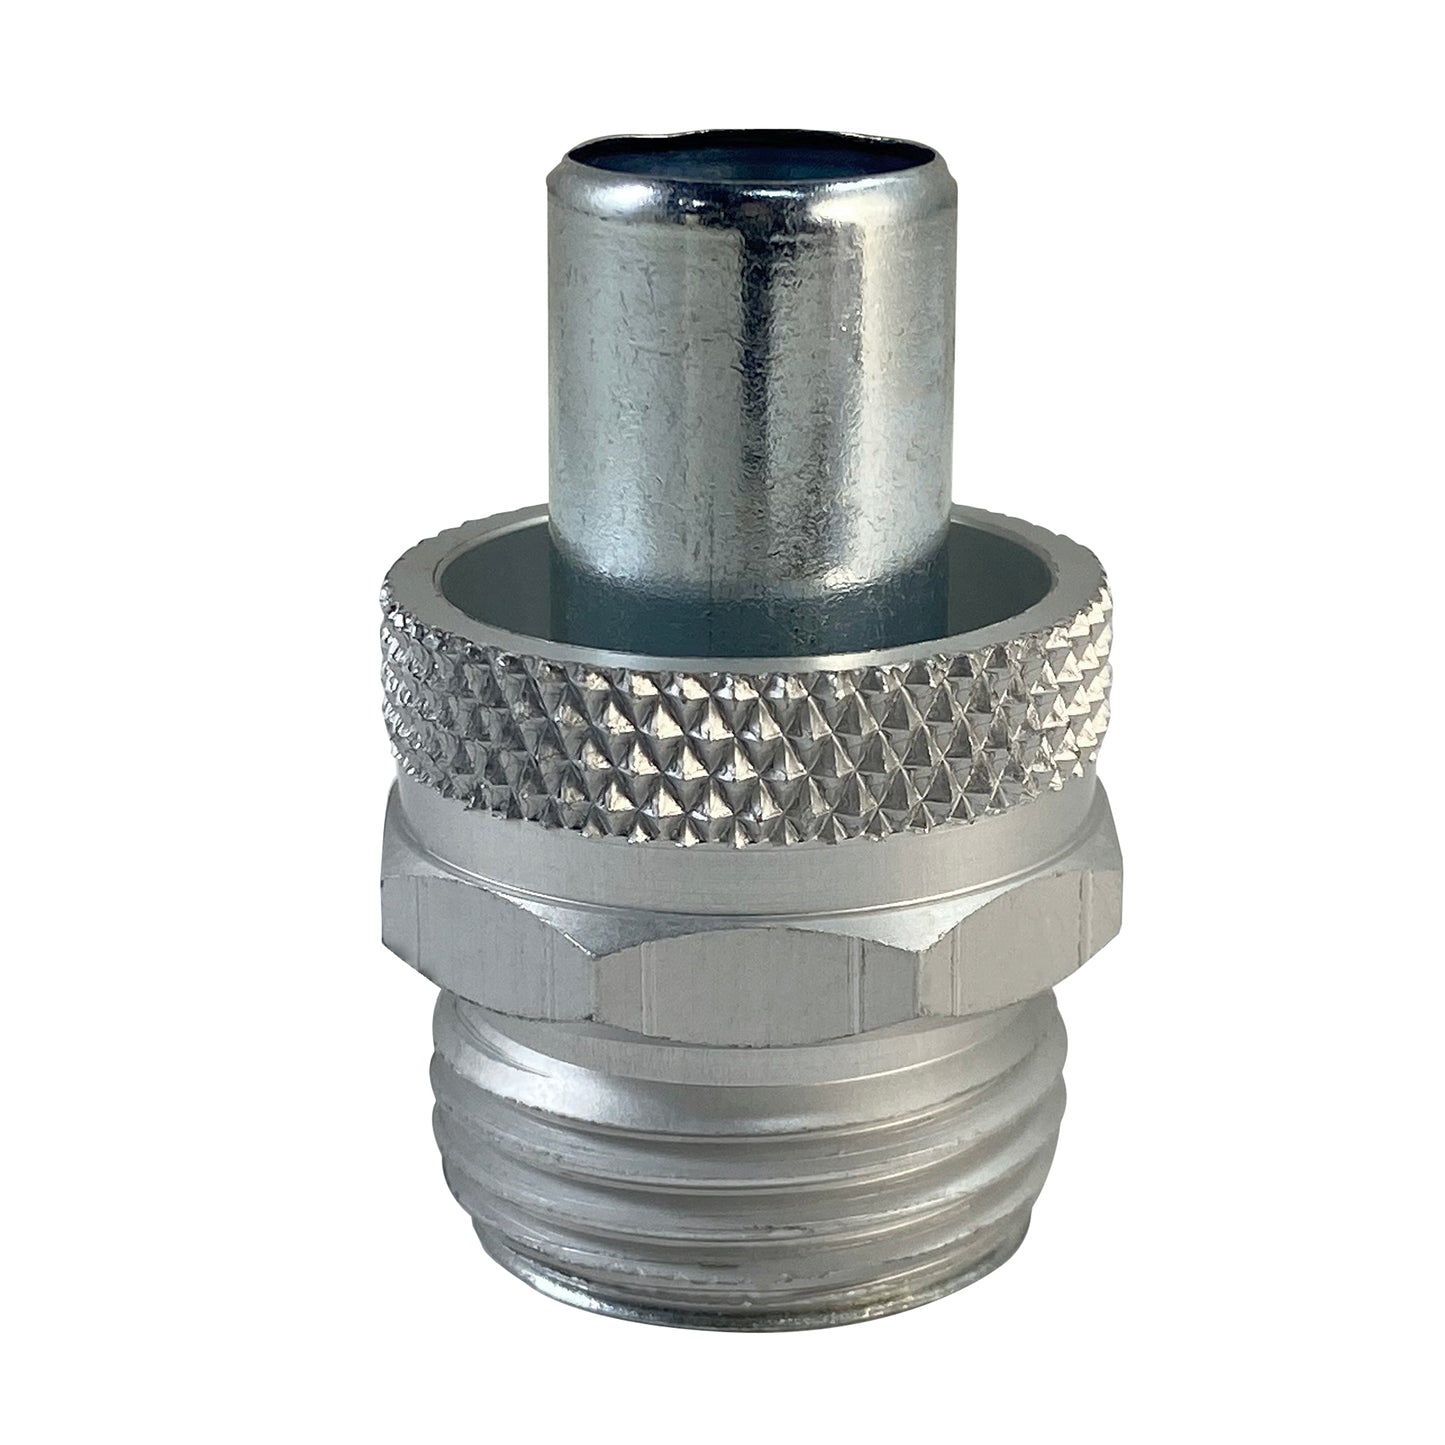 5/8" Heavy Duty Expansion Couplings